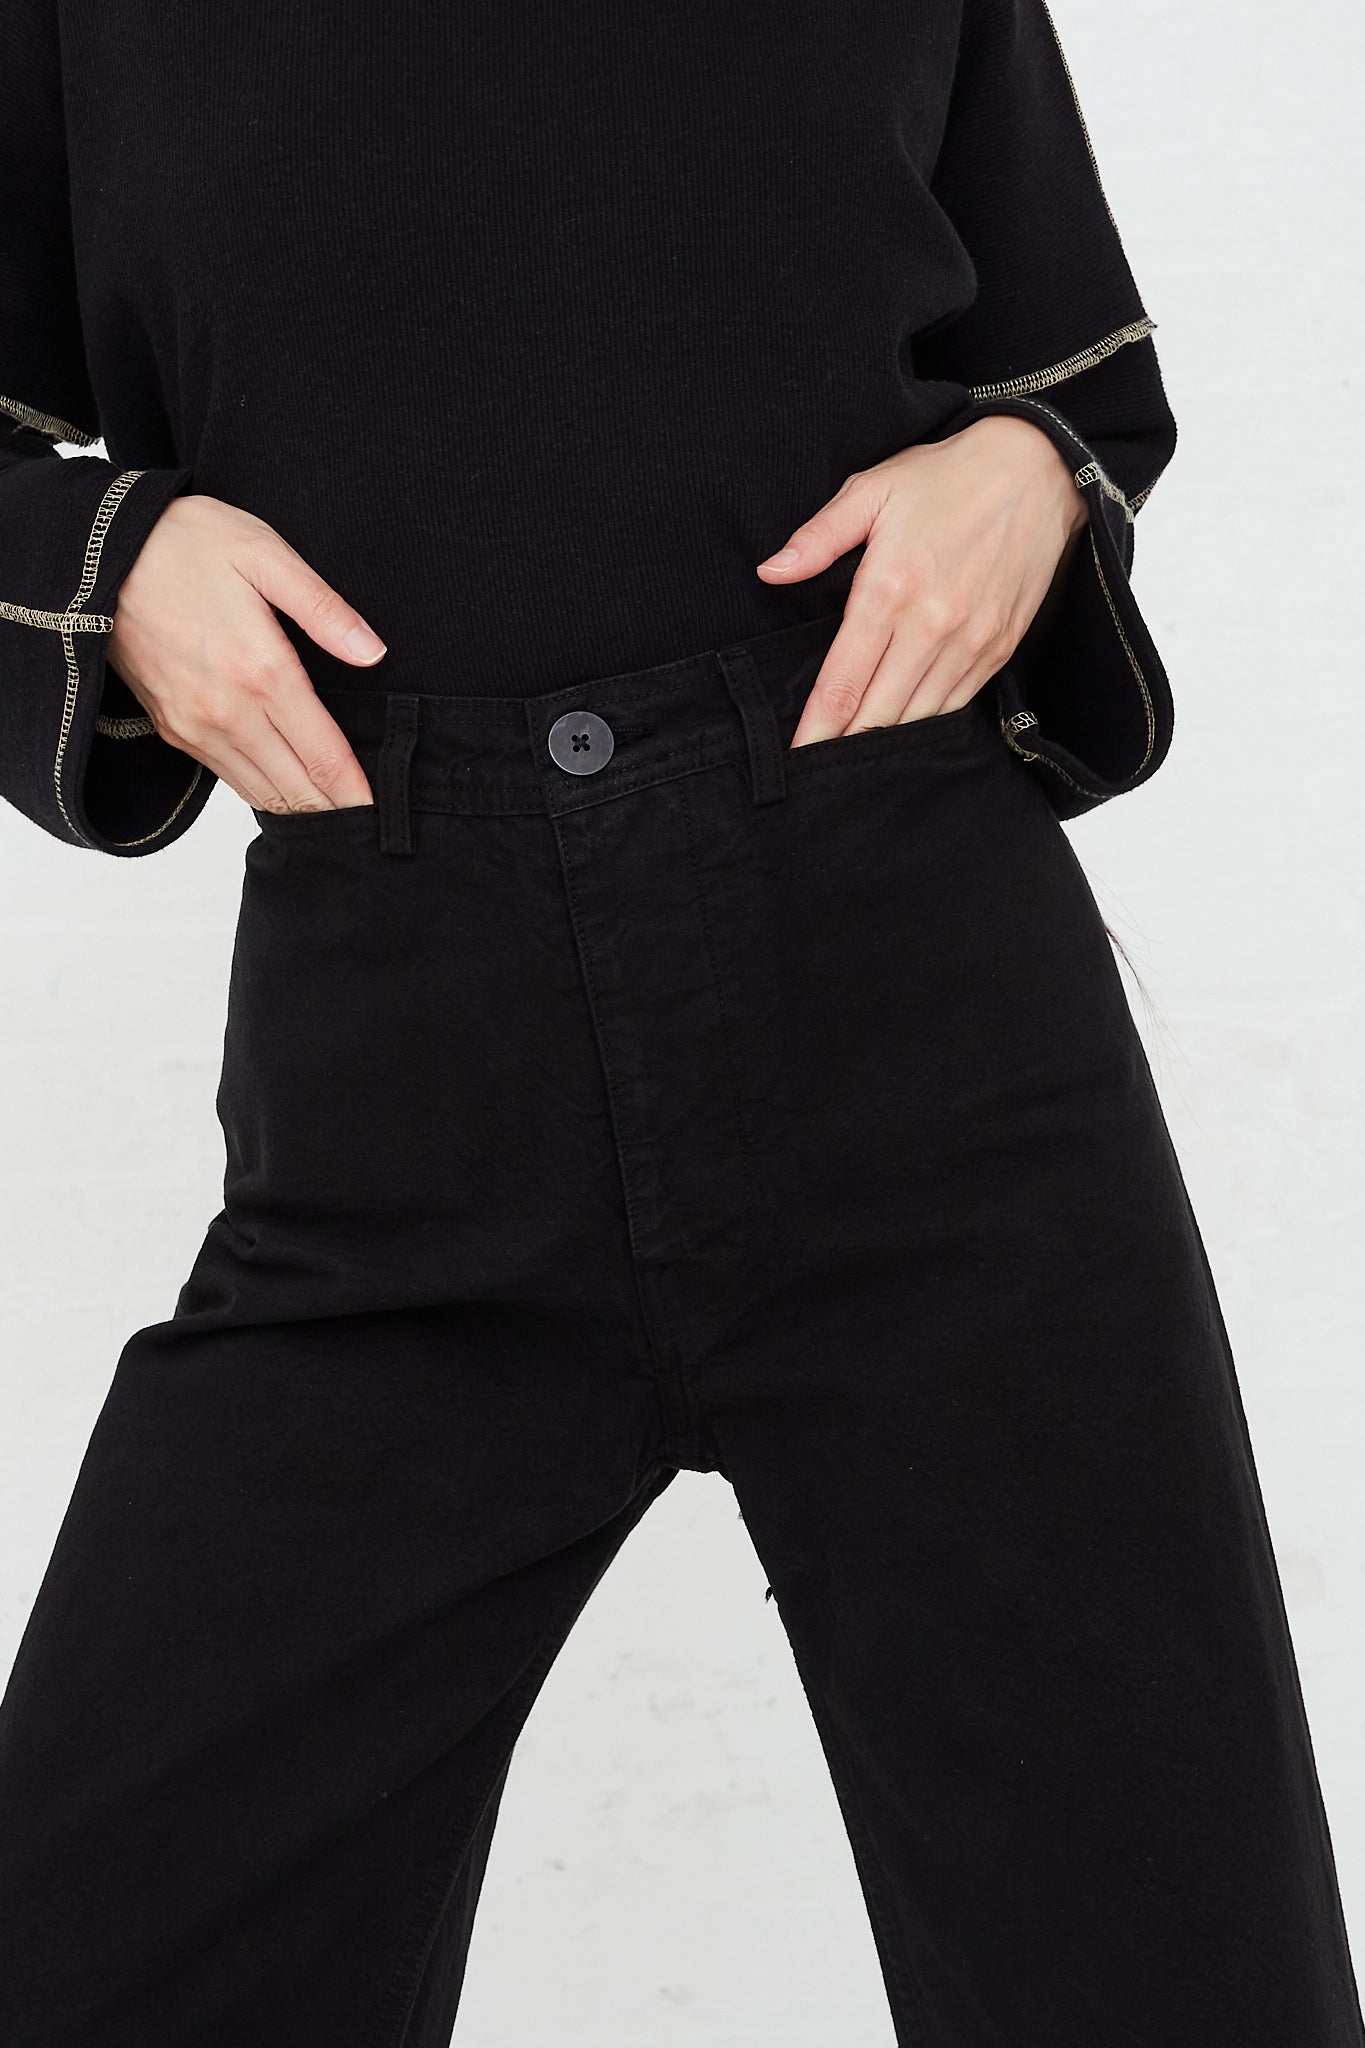 Organic Cotton Canvas Sailor Pant in Black by Jesse Kamm for Oroboro Front Upclose